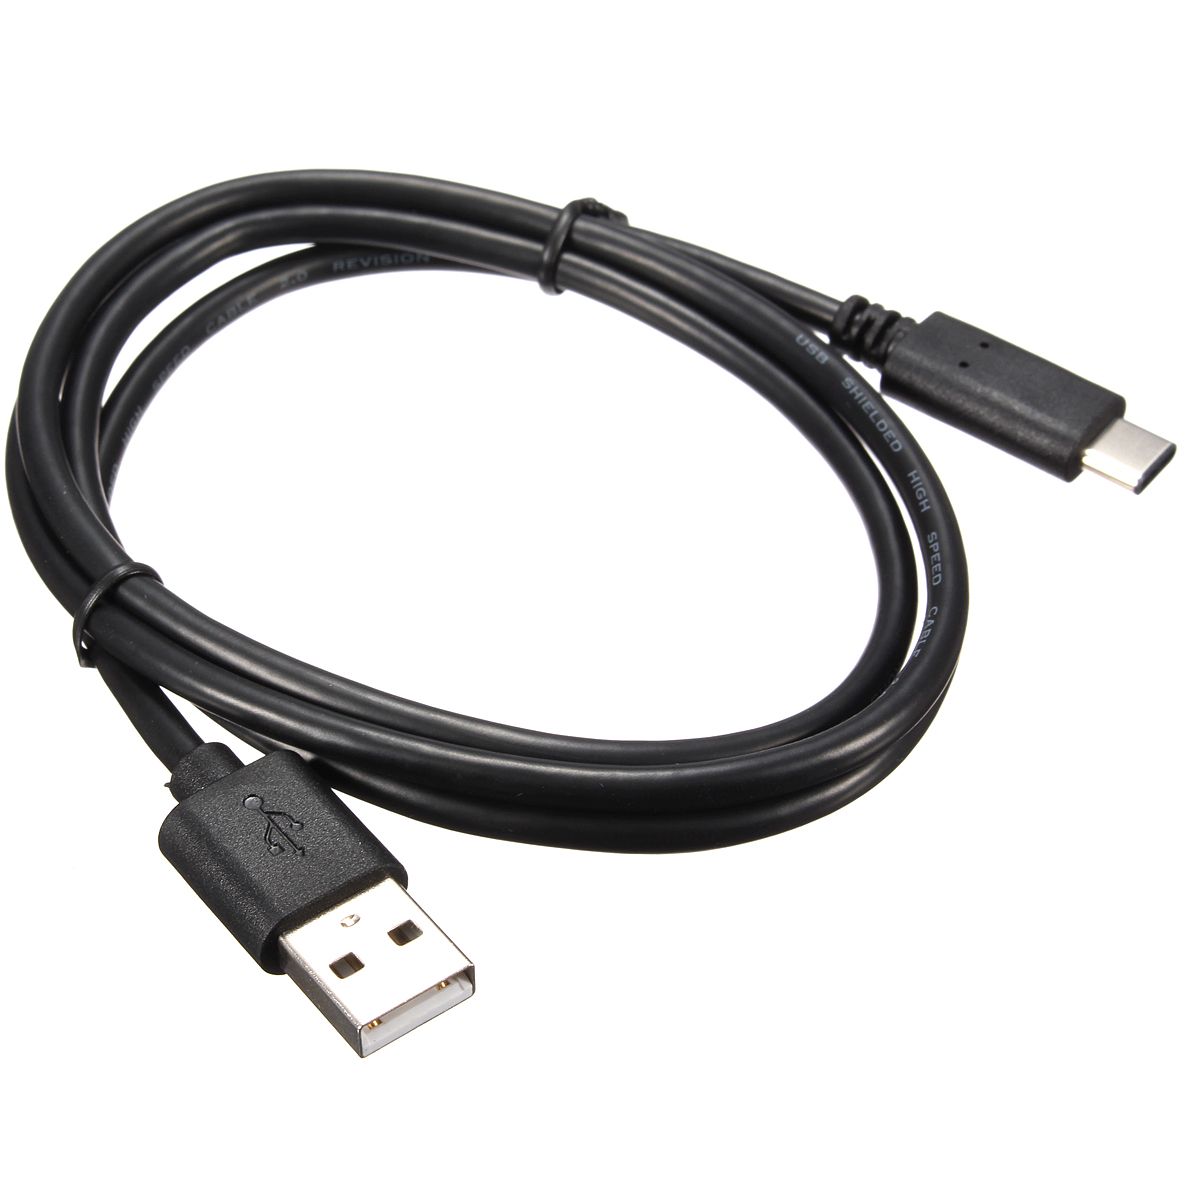 USB-31-Type-C-Male-Connector-to-USB20-A-Male-Data-Cable-Power-Charging-Cable-1633715